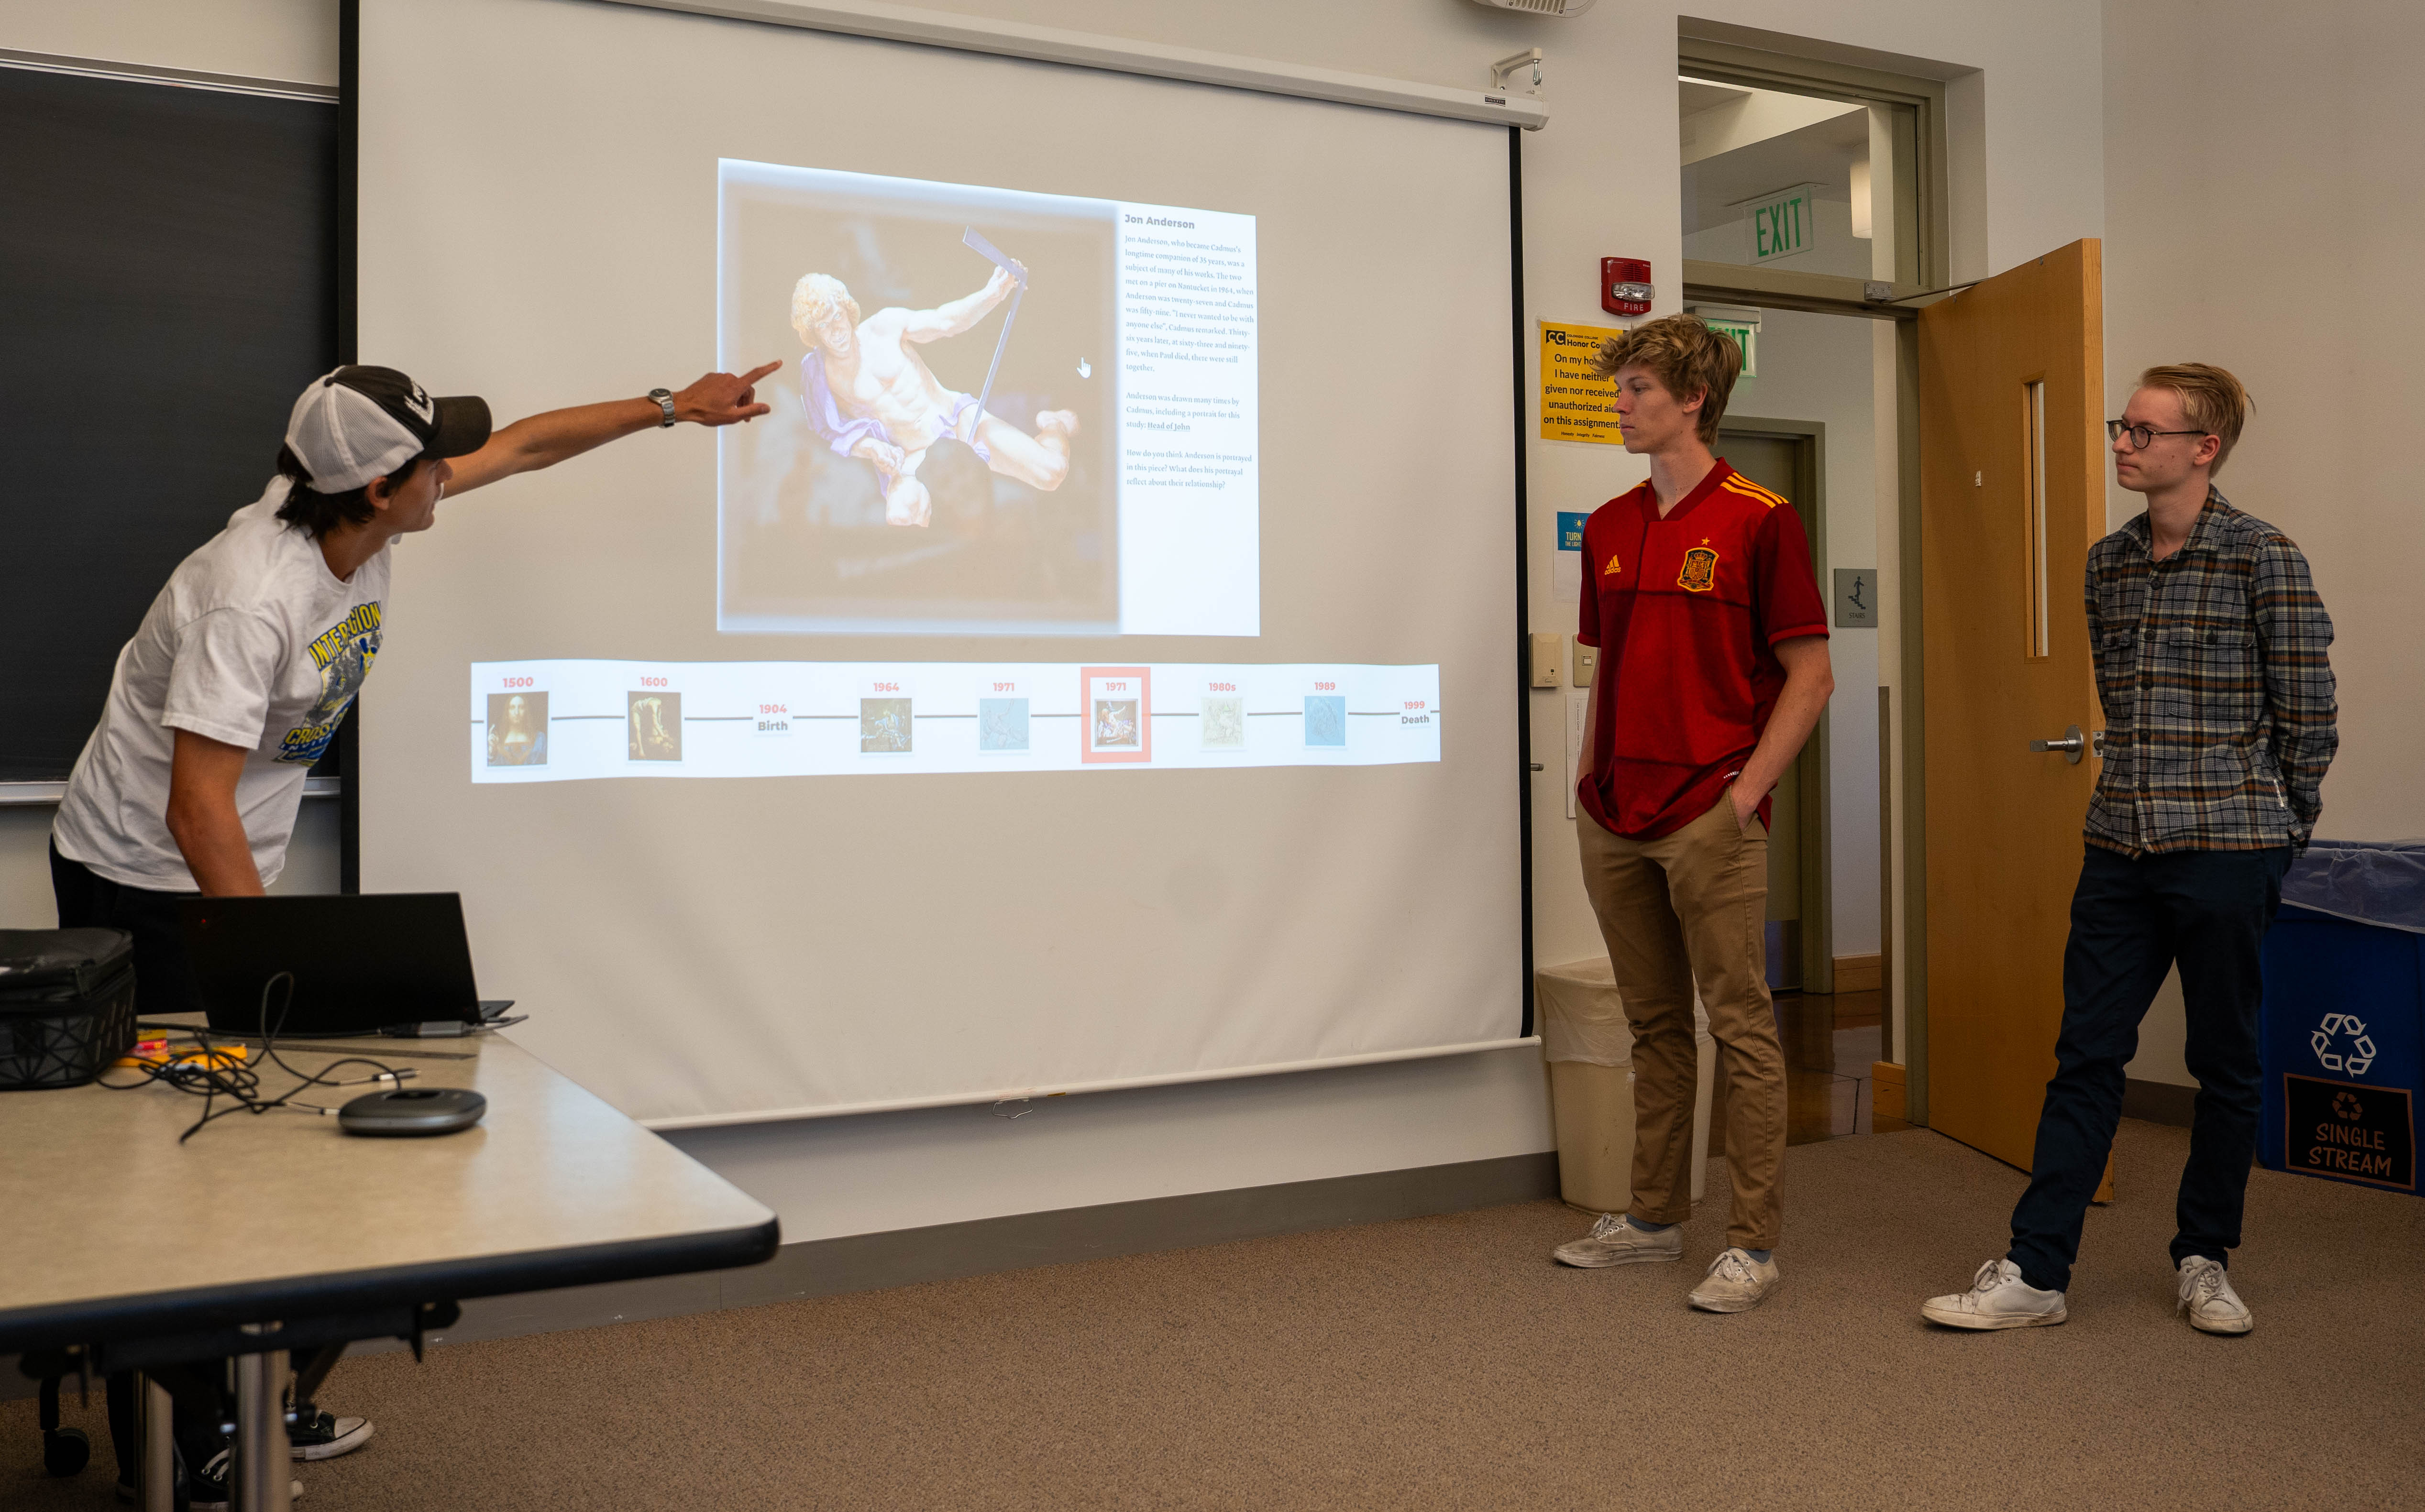 James Settles '24, Stewart Sessions '25, and David Prelinger, an exchange student from Germany, present their final project in Dr. Varsha Koushik's Foundations of Human-Centered Computing during Block 2.